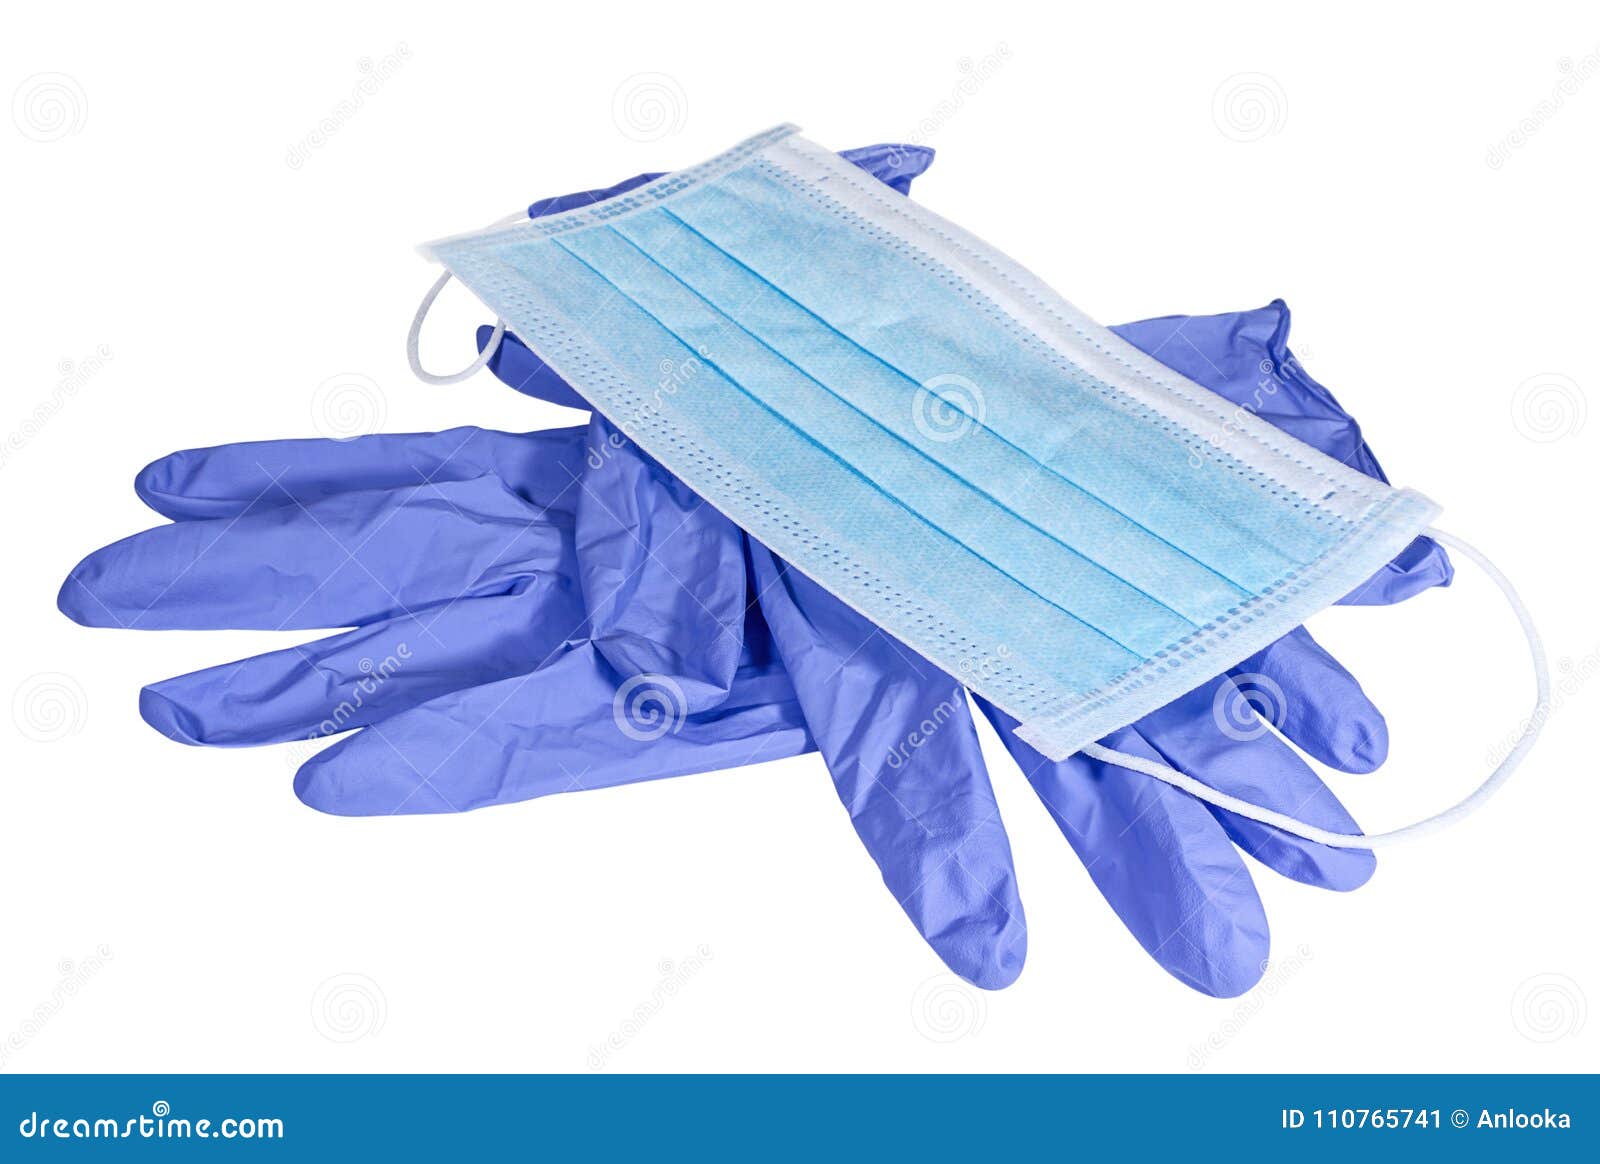 medical mask on the latex gloves